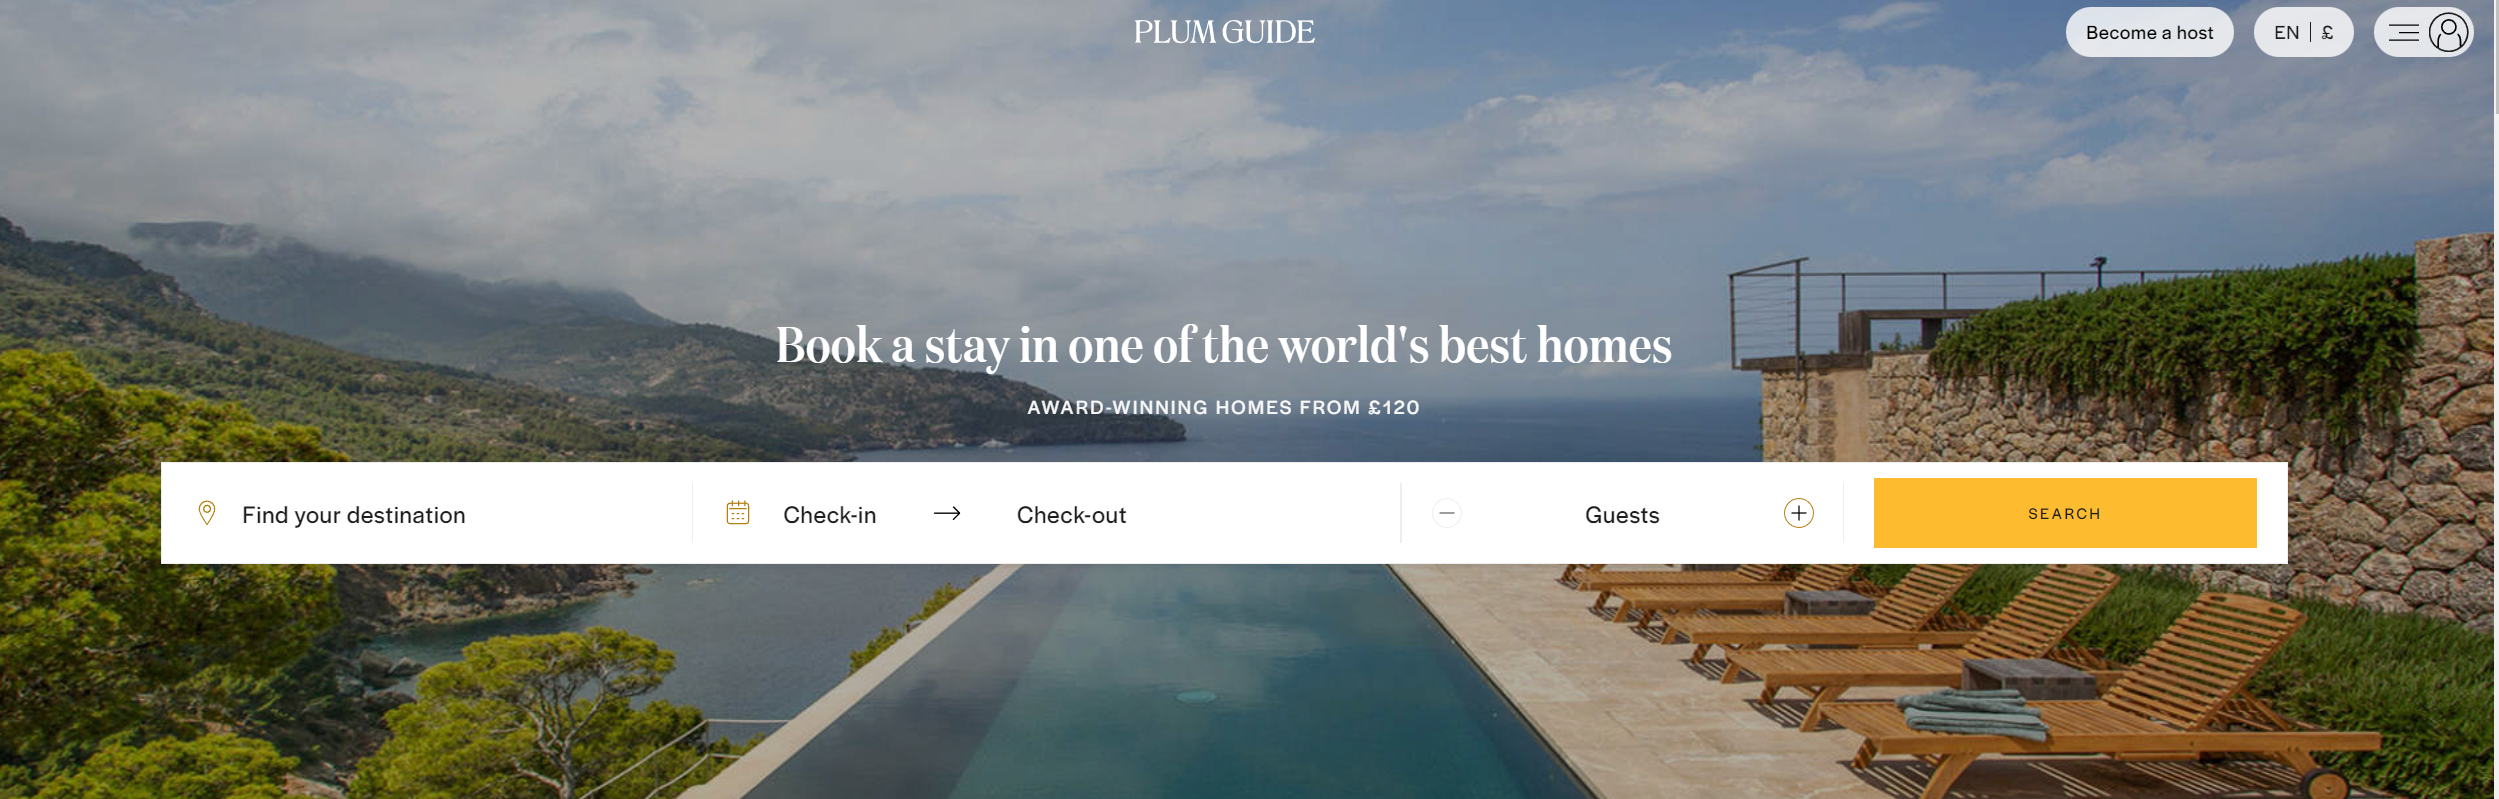 Not just homes any more: Airbnb expands into hotels and luxury